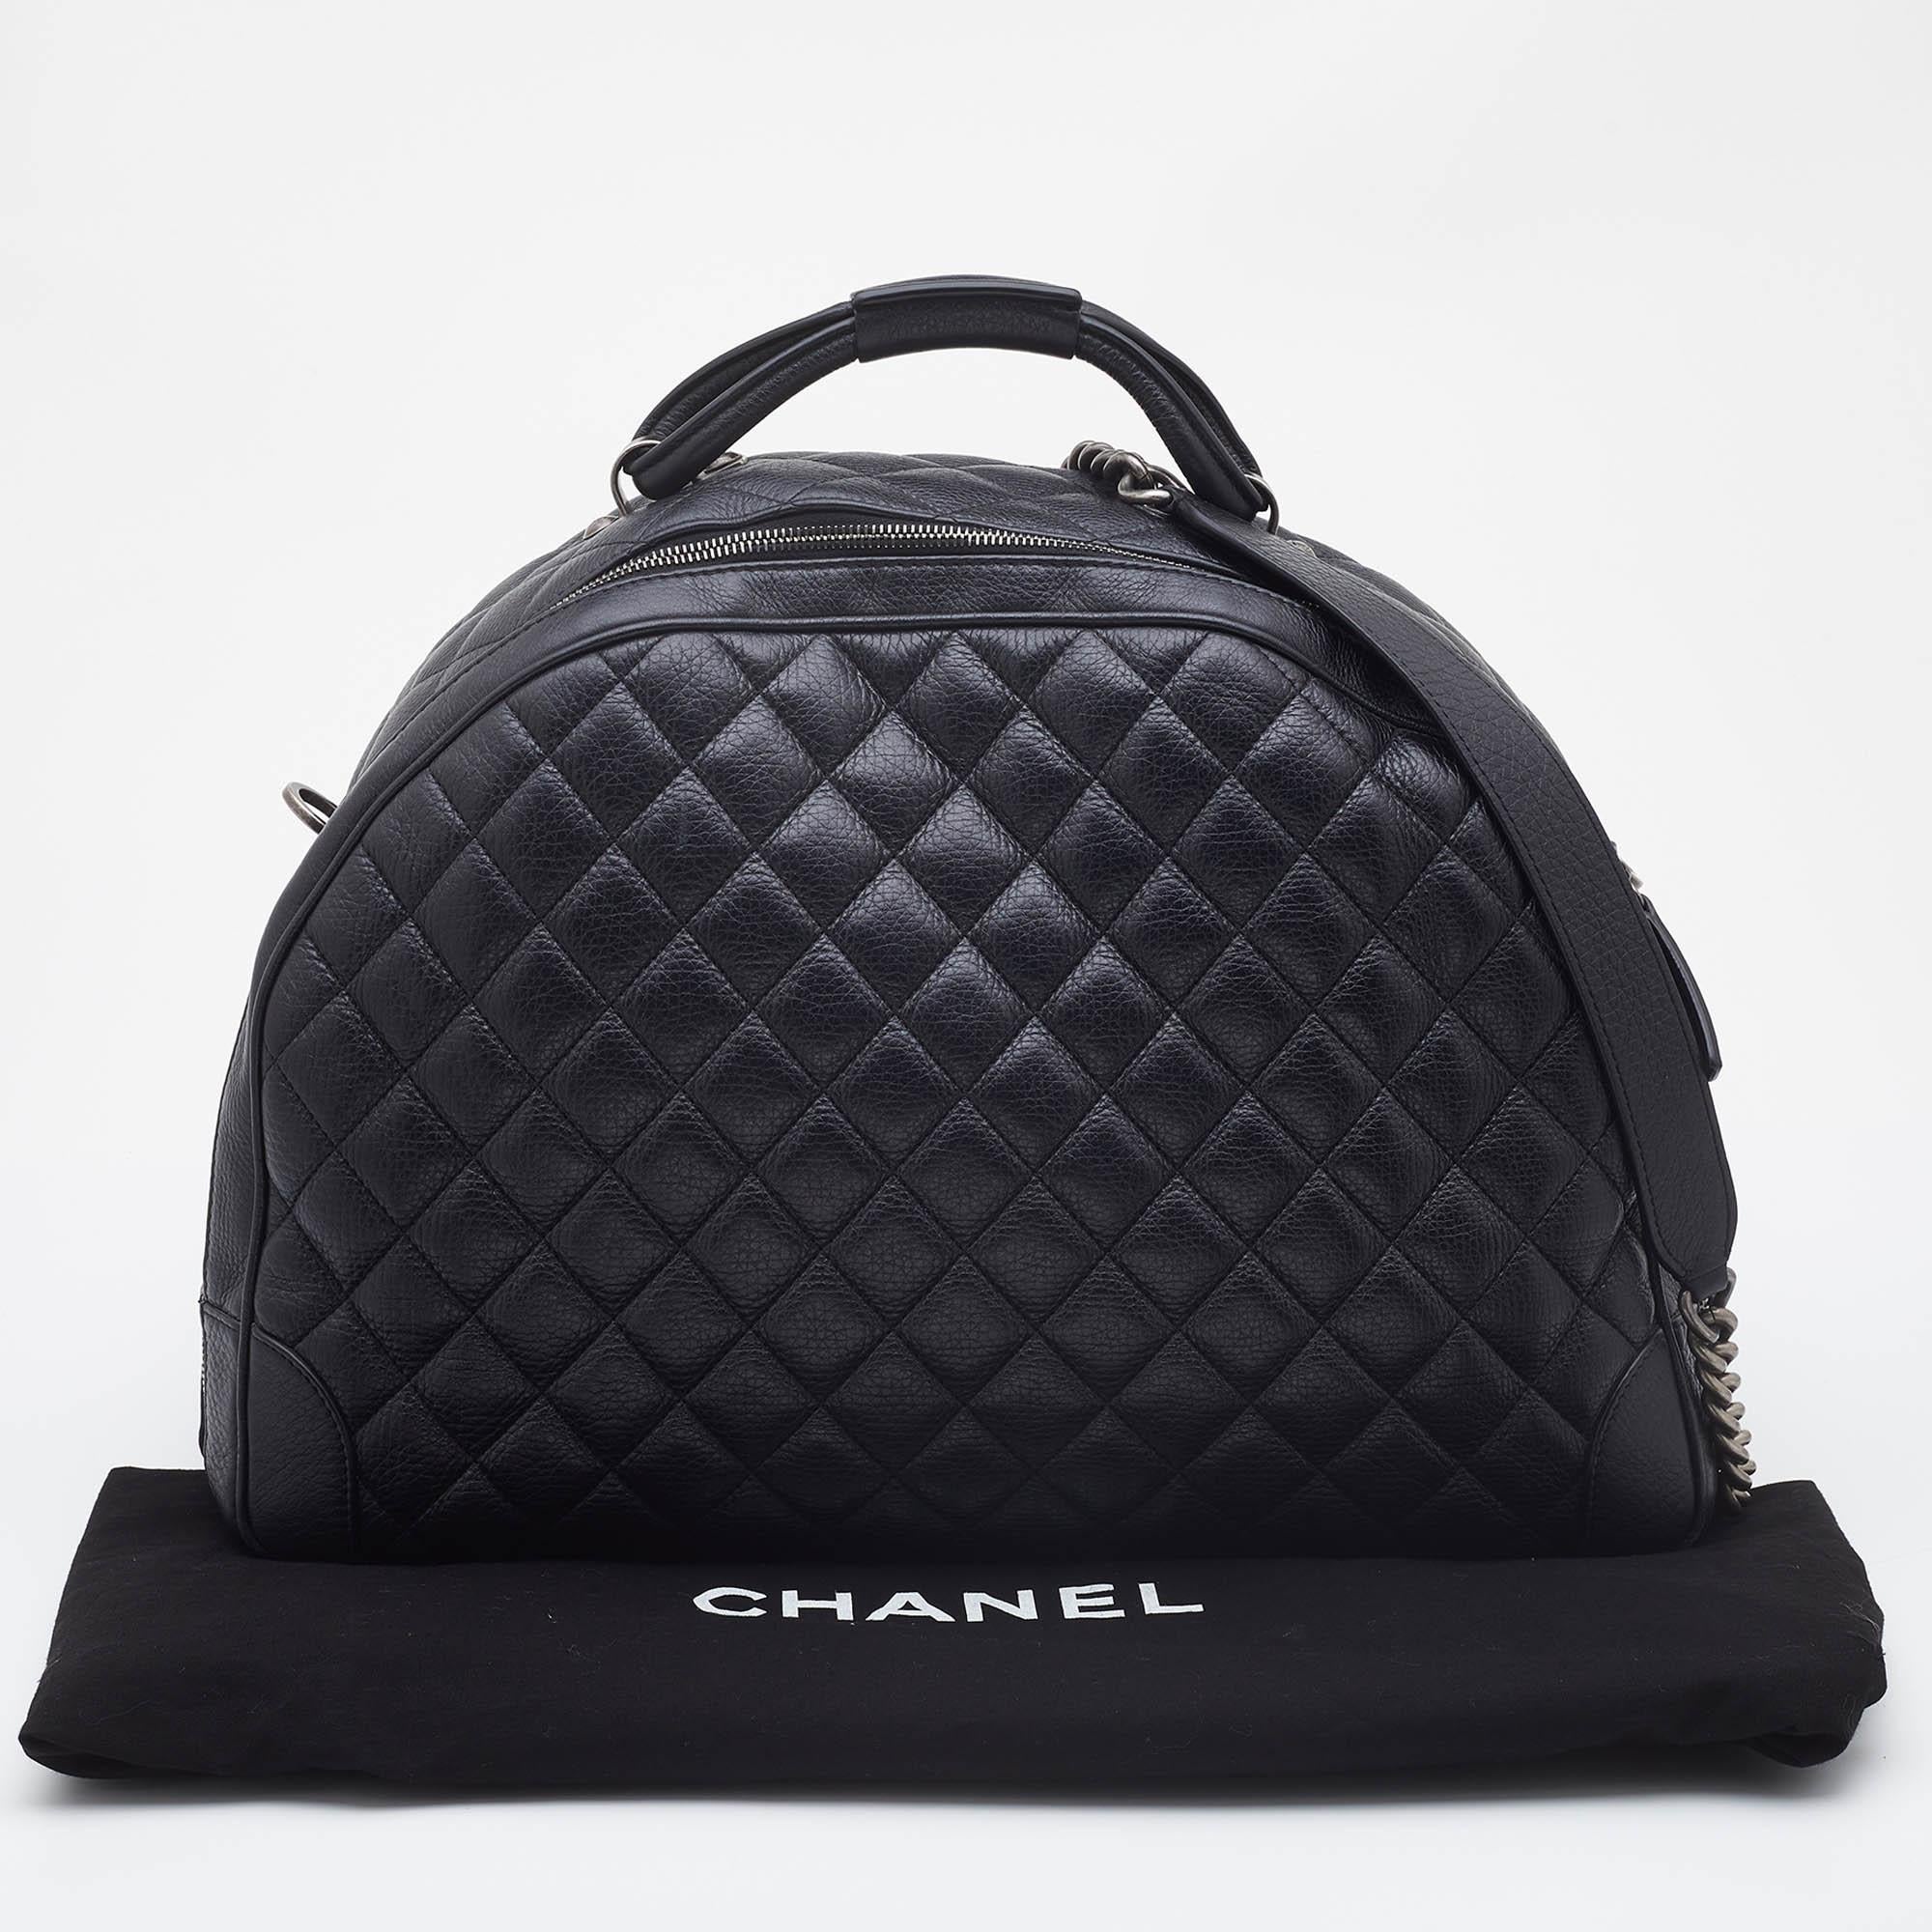 Chanel Black Quilted Leather Large Airlines Round Trip Bag 8